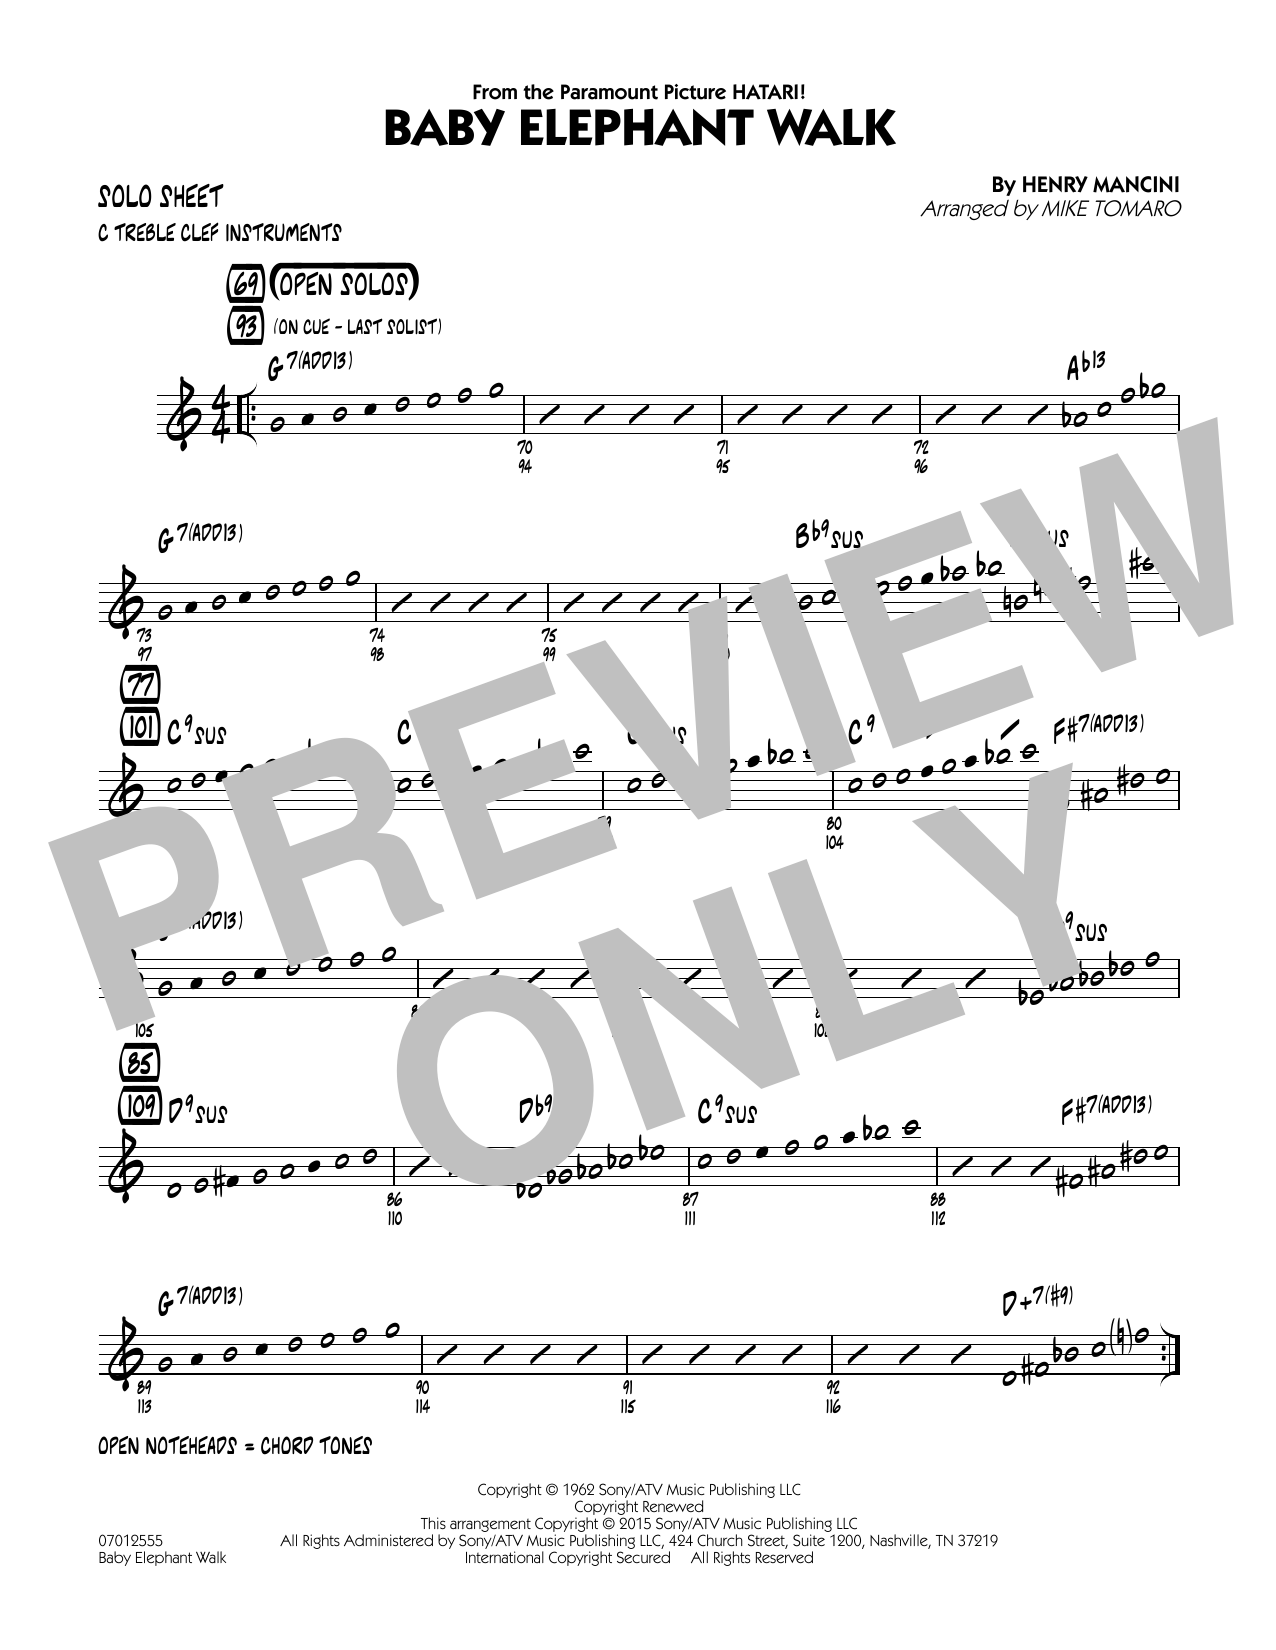 Mike Tomaro Baby Elephant Walk - C Solo Sheet sheet music notes and chords. Download Printable PDF.